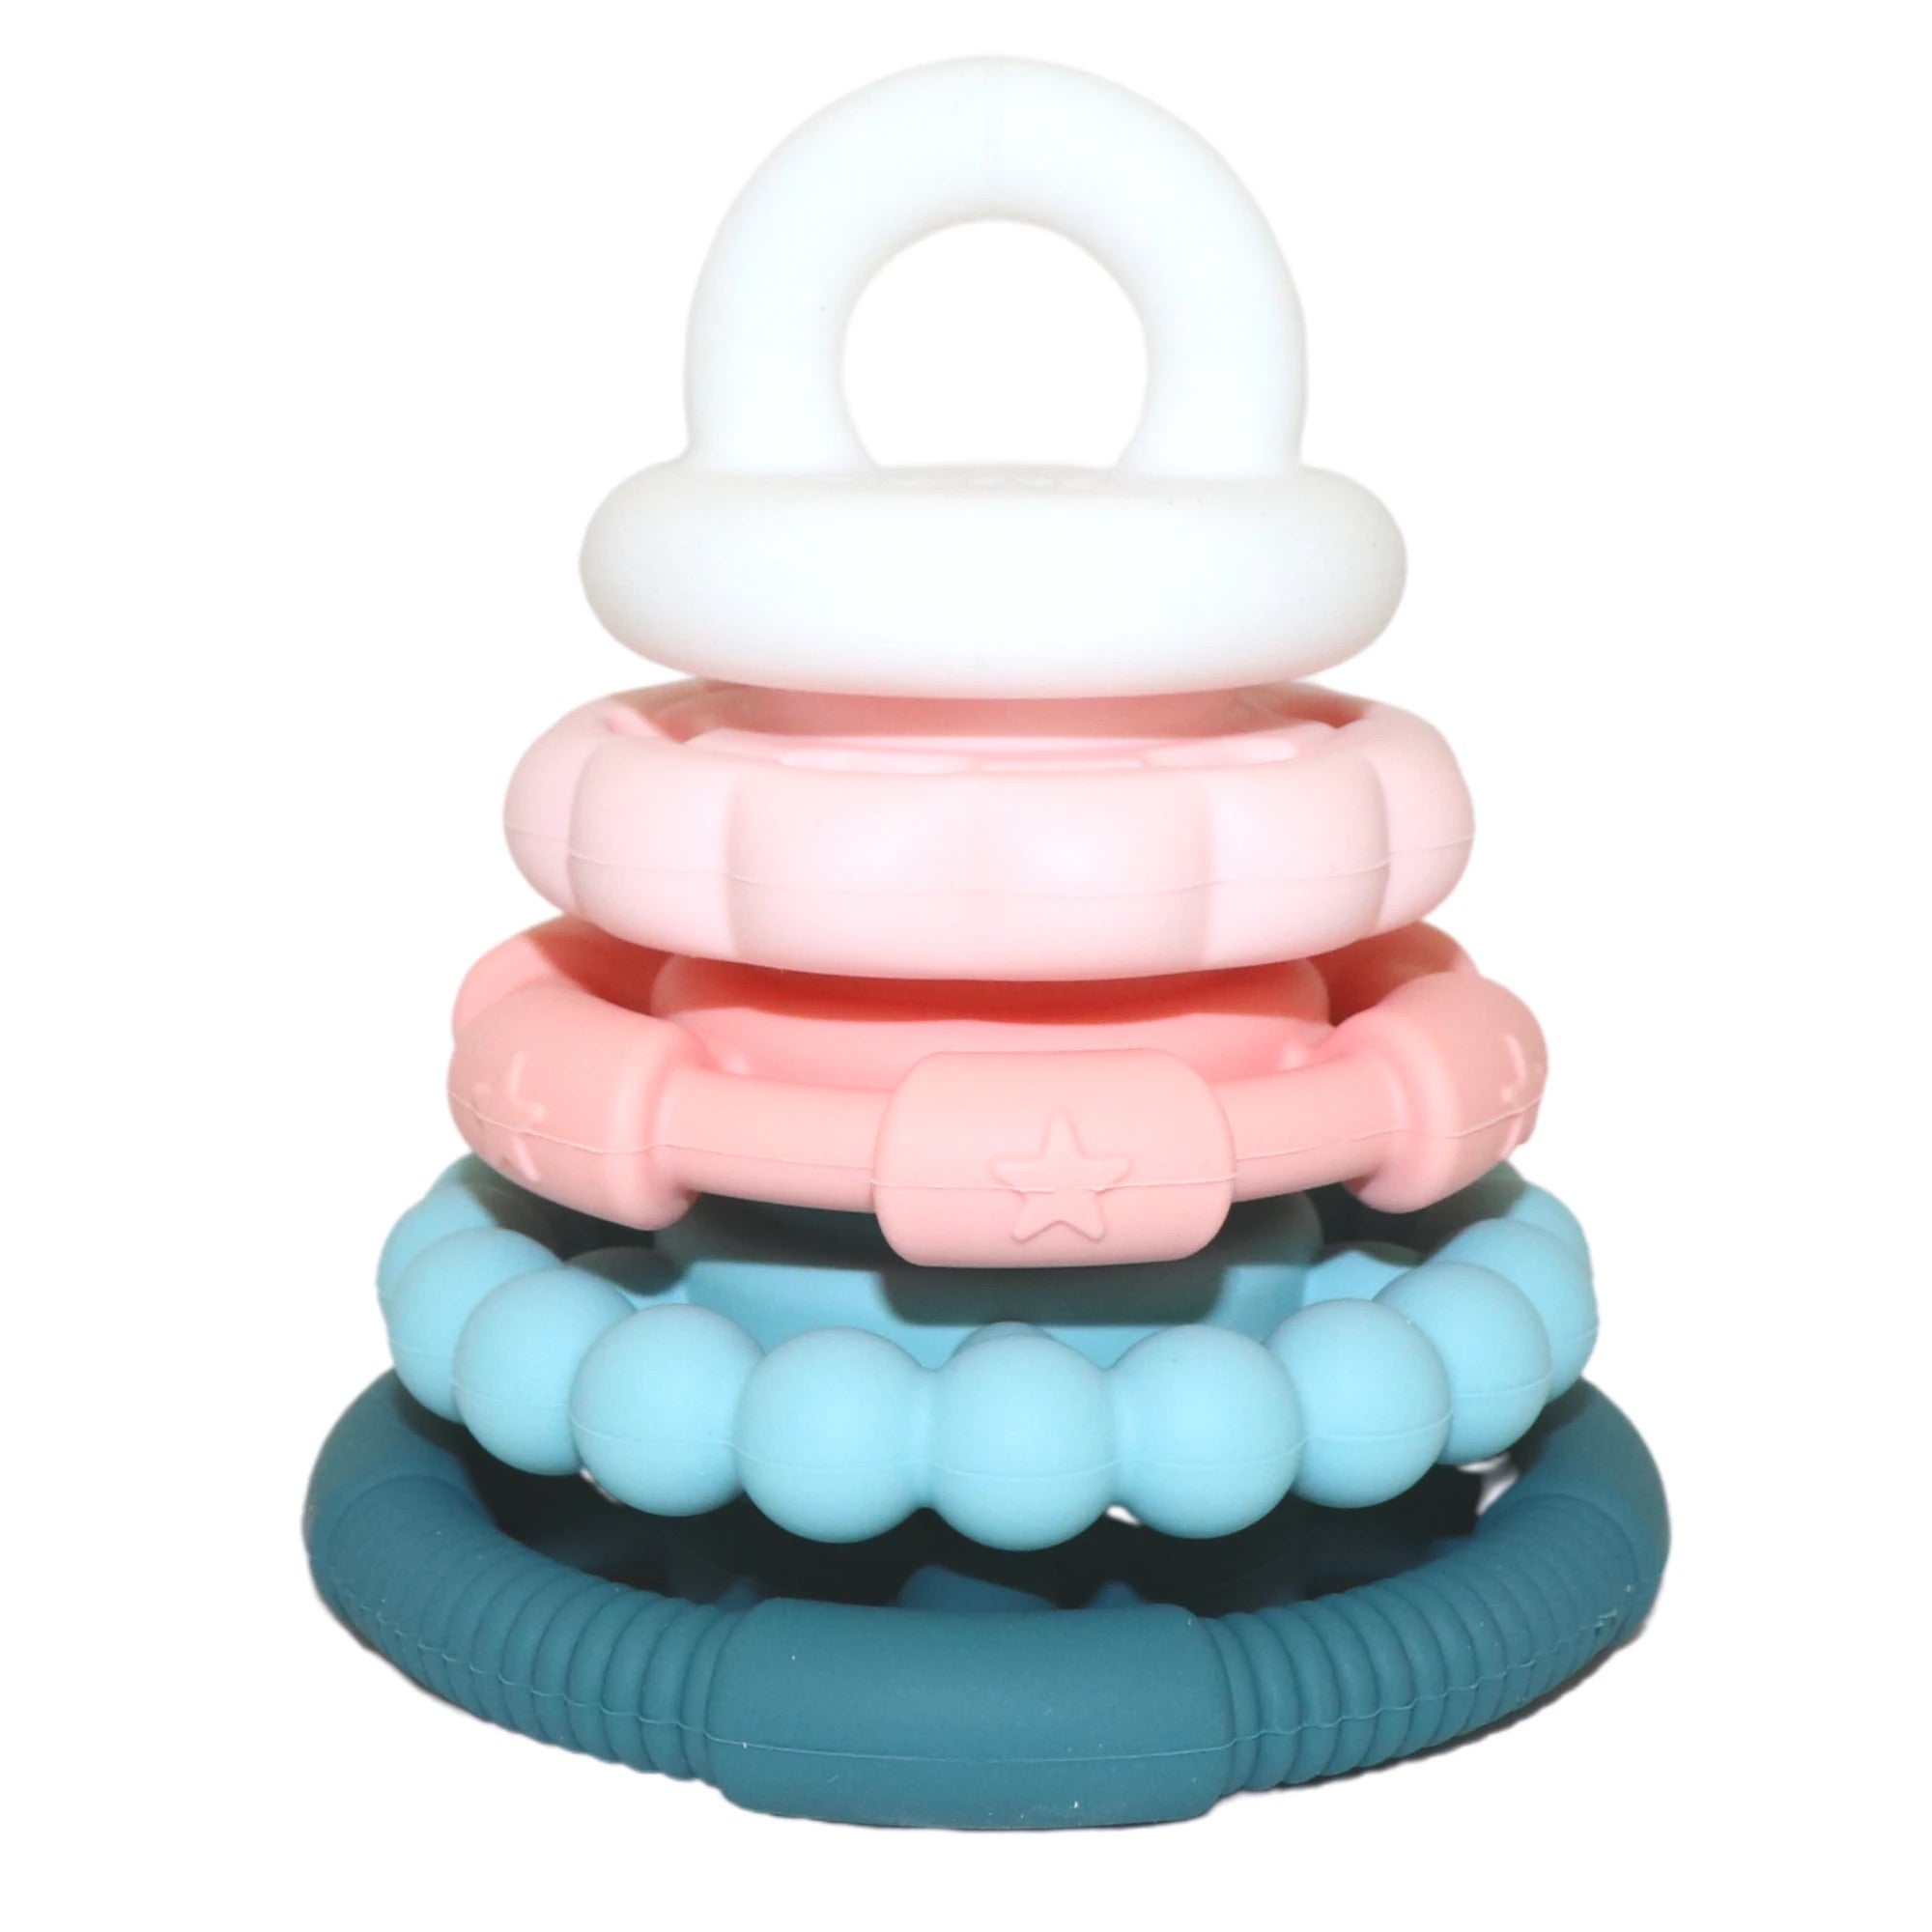 Jellystone Rainbow Stacker and Teether